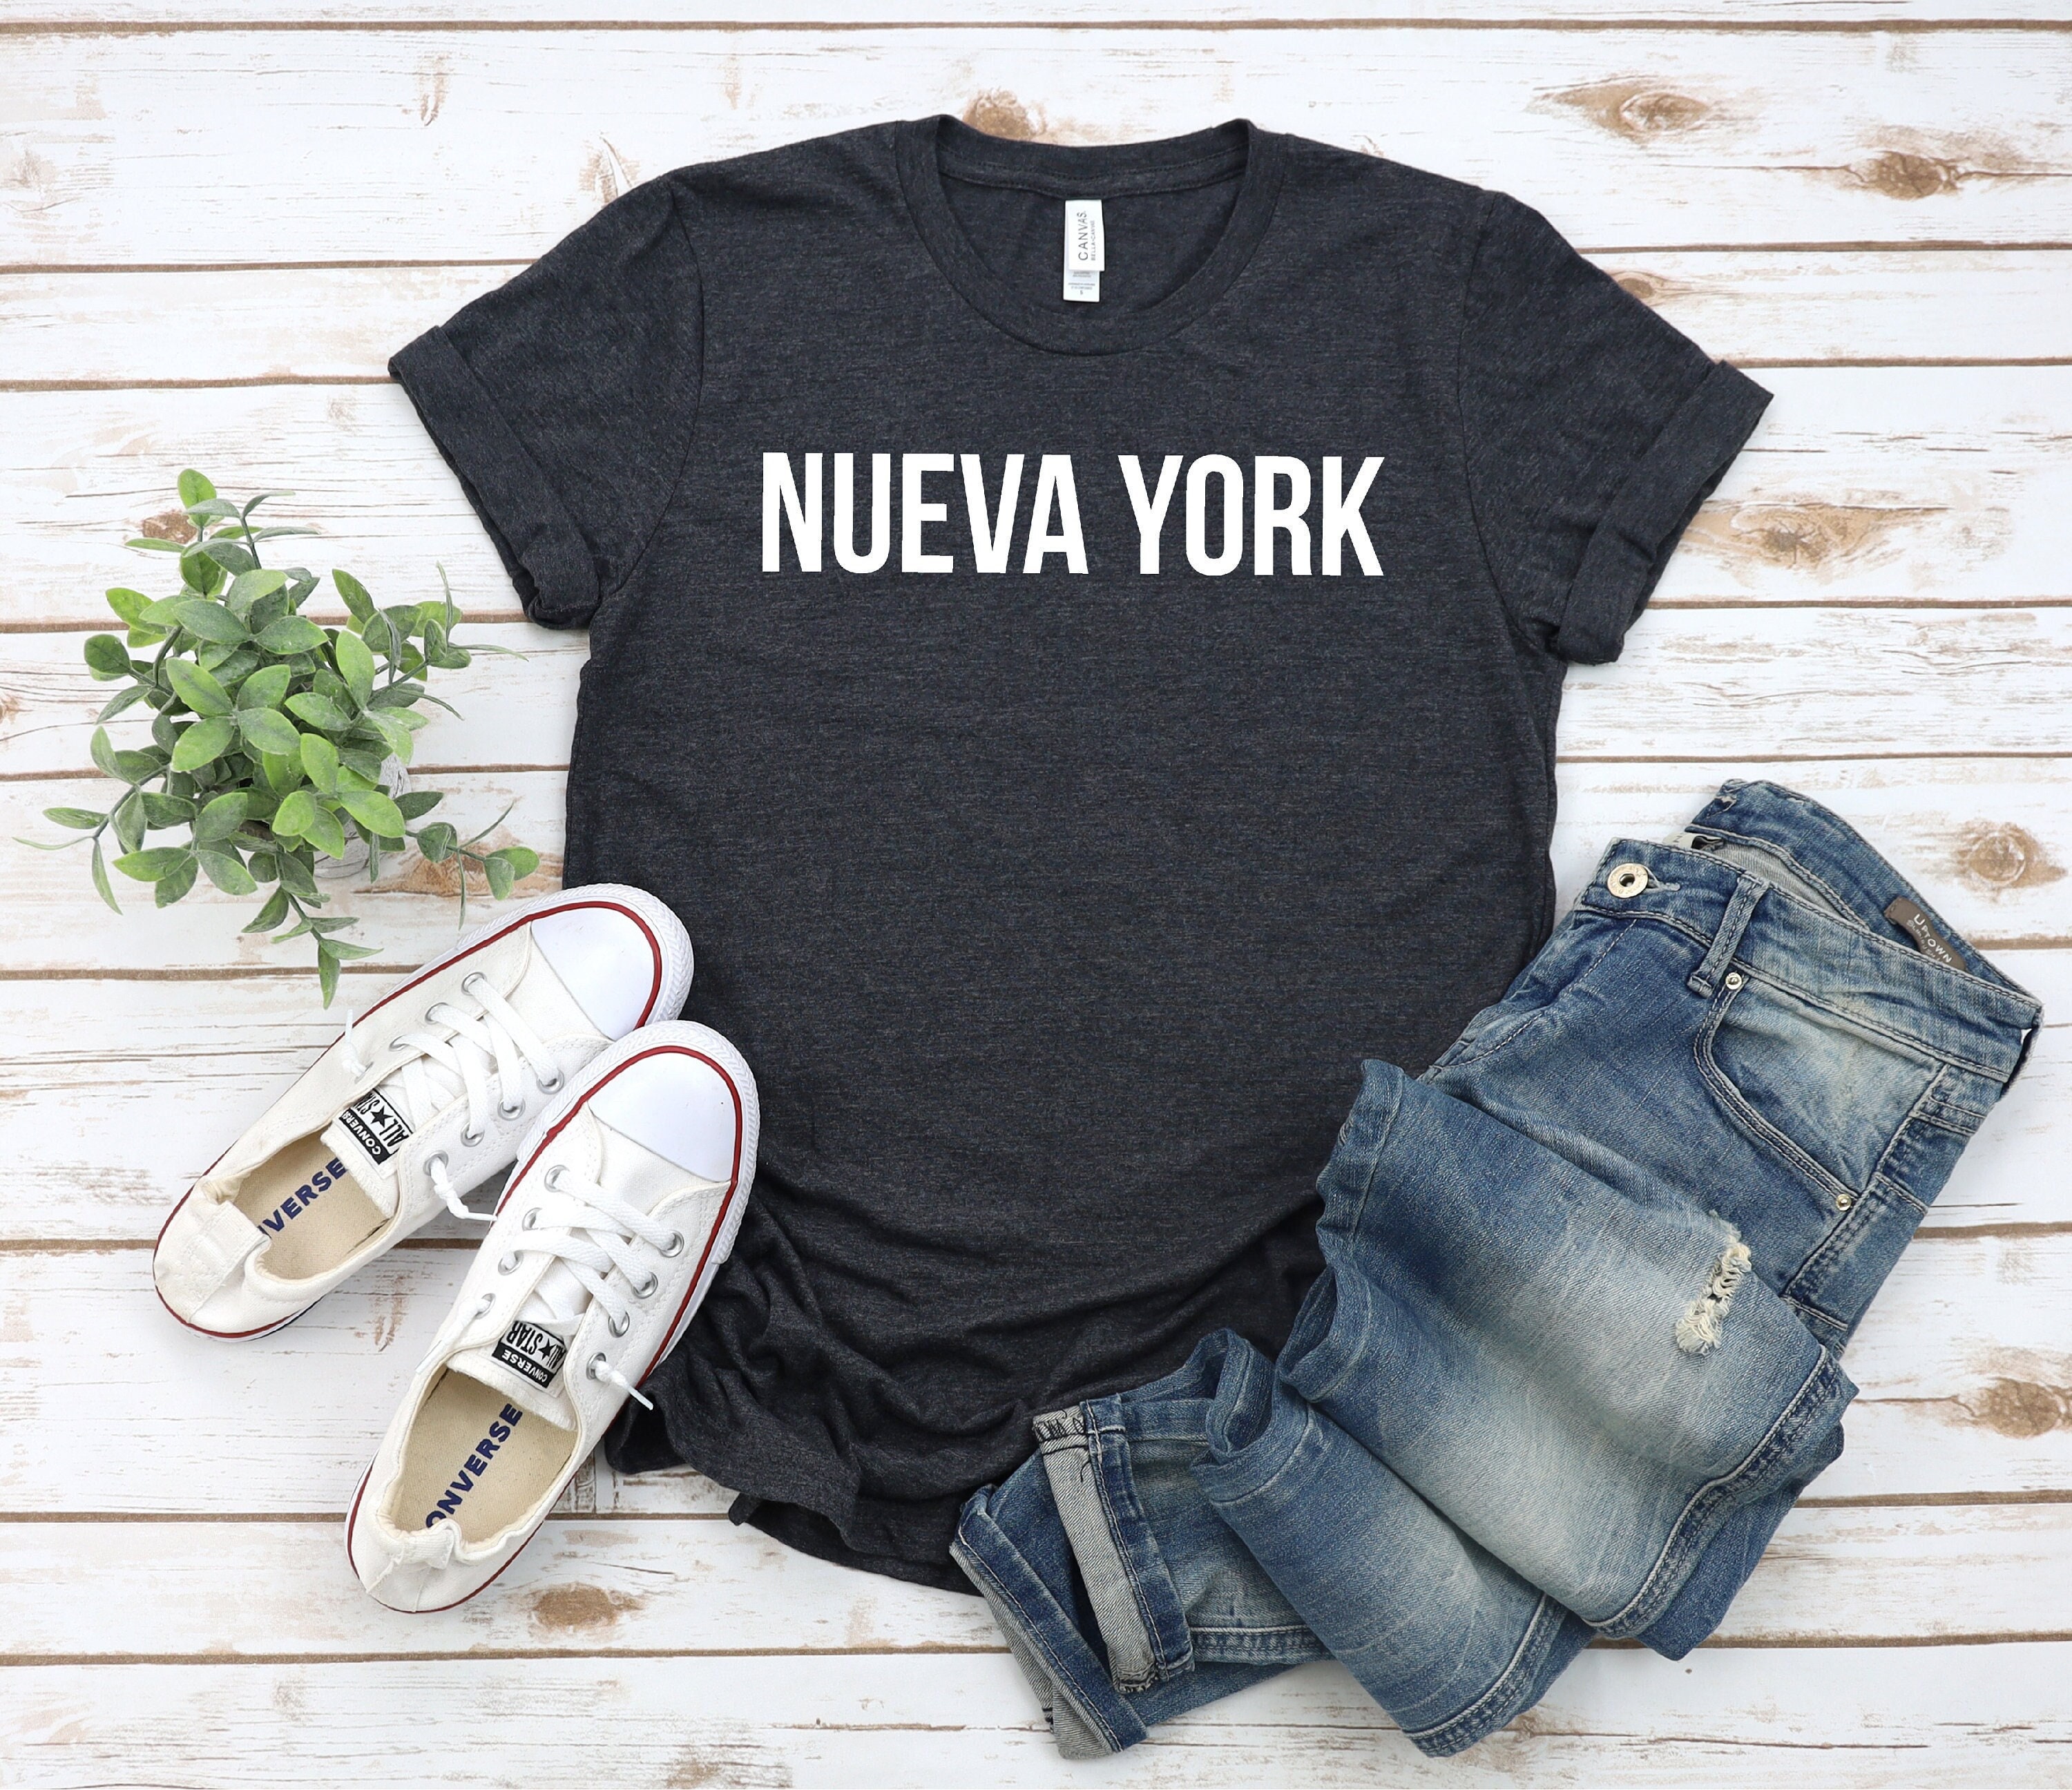 Nueva York Crop Top White Navy Washington Heights Gift NYC Top NYC Swag New York City Crop Tee in the heights Active The Bronx